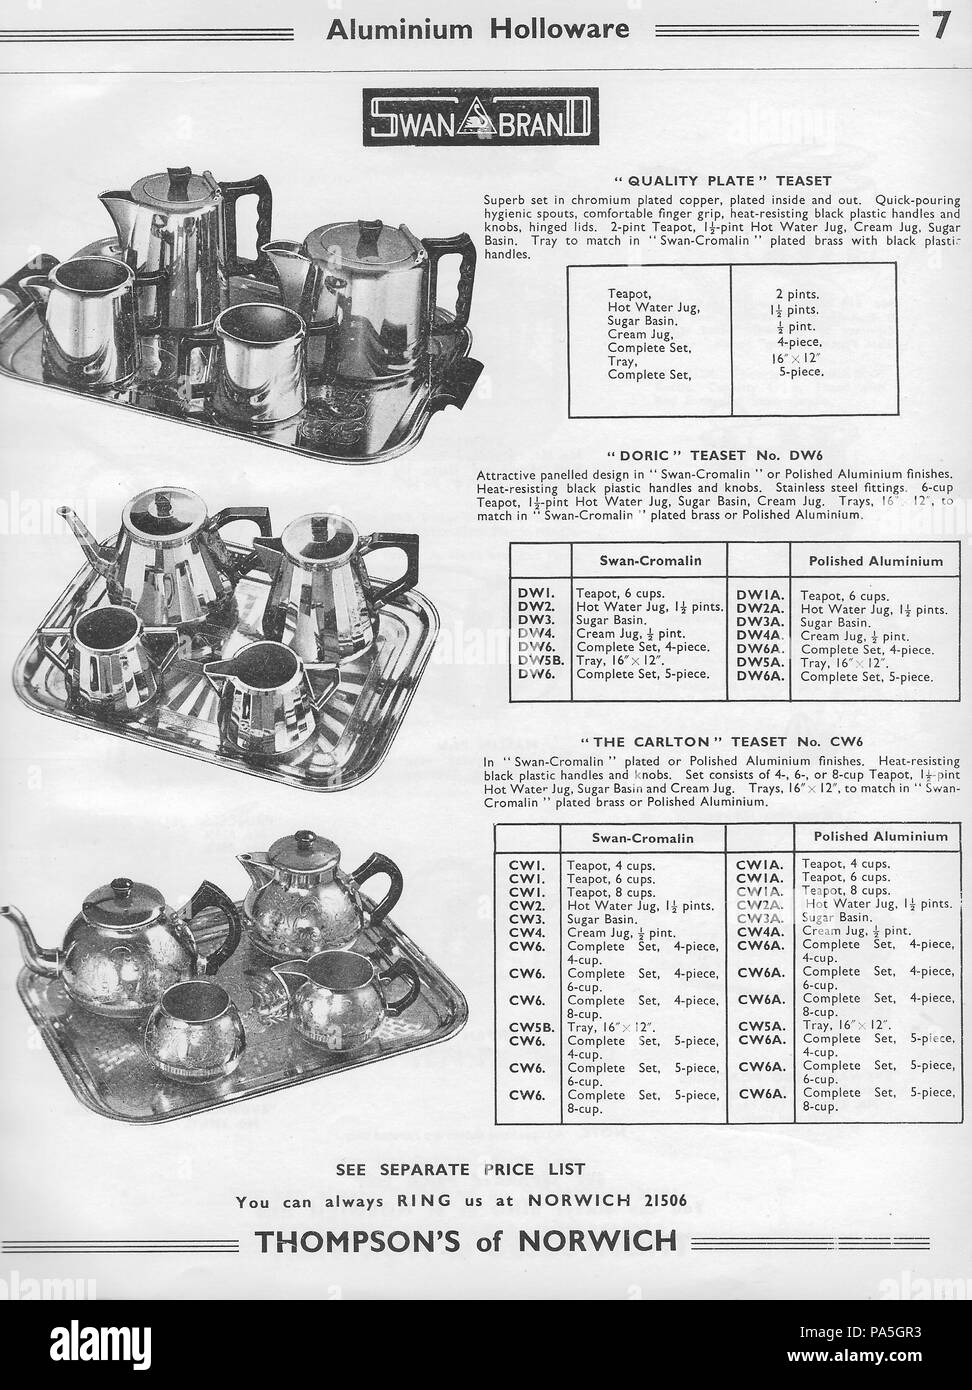 https://c8.alamy.com/comp/PA5GR3/general-wholesale-catalogue-hardware-factors-h-thompson-sons-ltd-chalk-hill-works-norwich-england-uk-1940s-1950s-retro-vintage-household-products-items-illustrated-pictures-drawings-illustrations-monochrome-black-and-white-PA5GR3.jpg